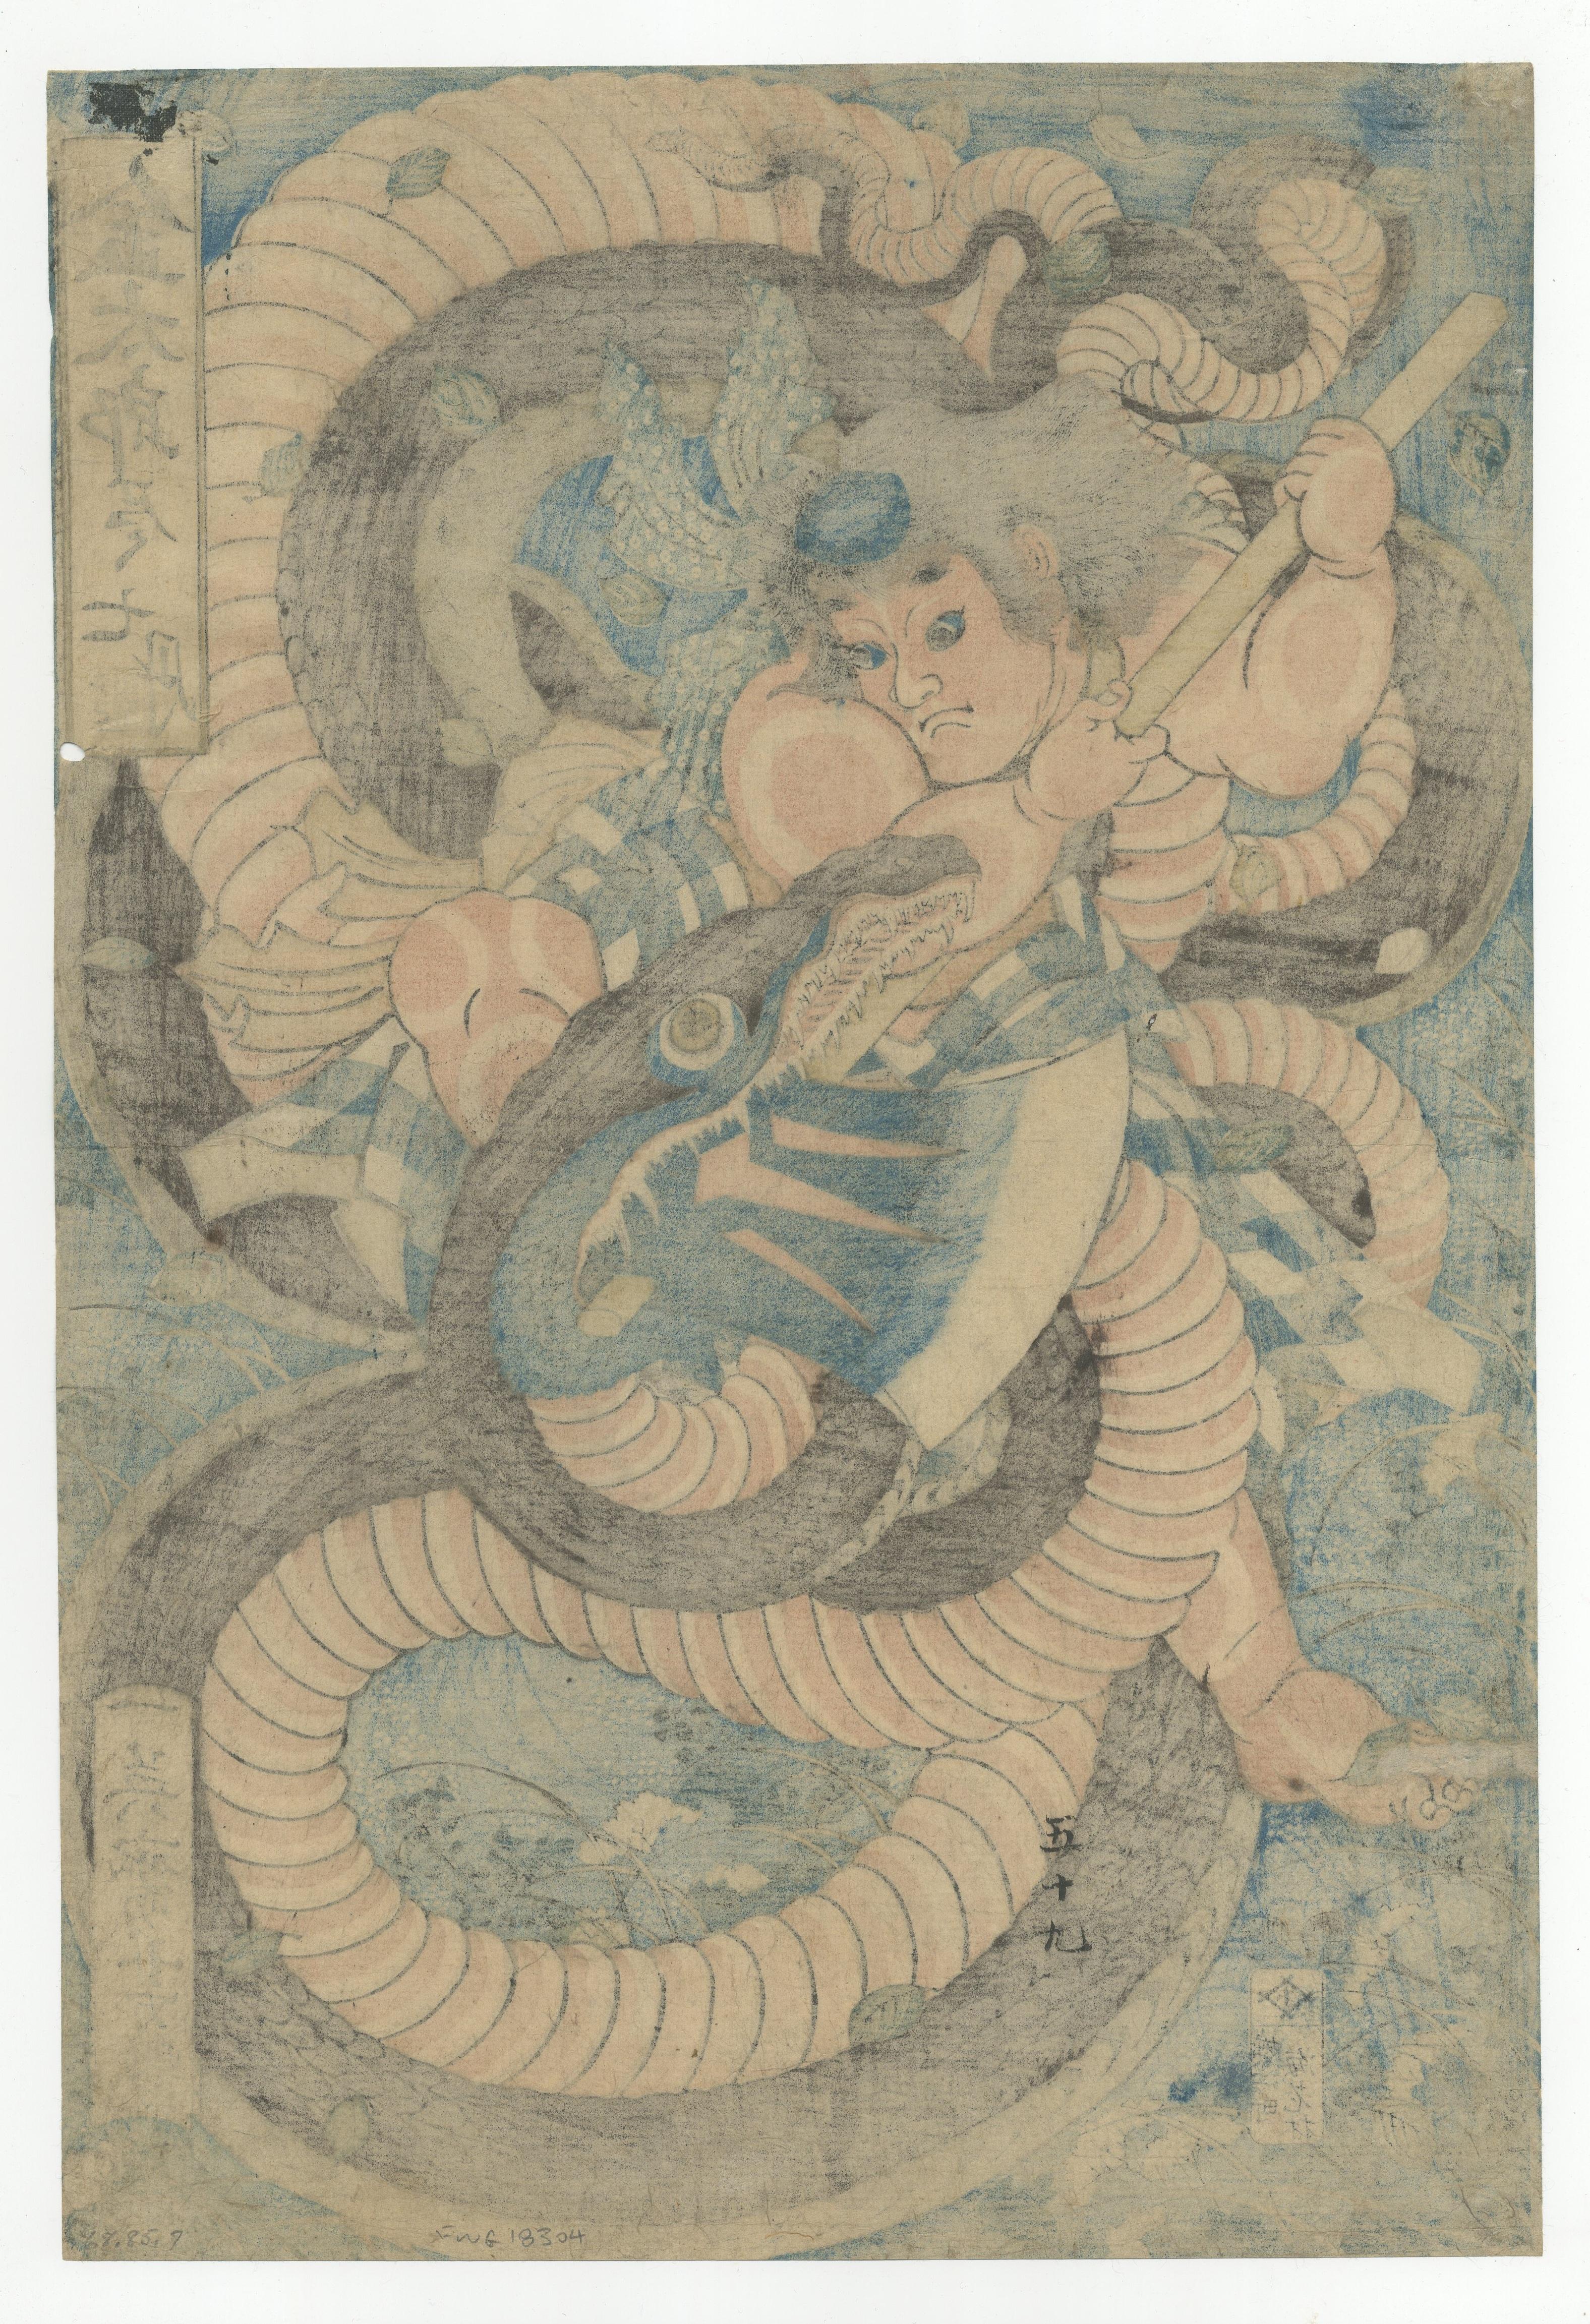 Artist: Yoshitsuya Utagawa (1822-1866)
Title: The Picture of Kintaro
Publisher: Ebiya Rinnosuke
Date: 1847-1852
Dimensions: 24.7 x 36.9 cm.

There are not too few tales of monstrous snakes in Japanese folklore. From the nation's origin tale to